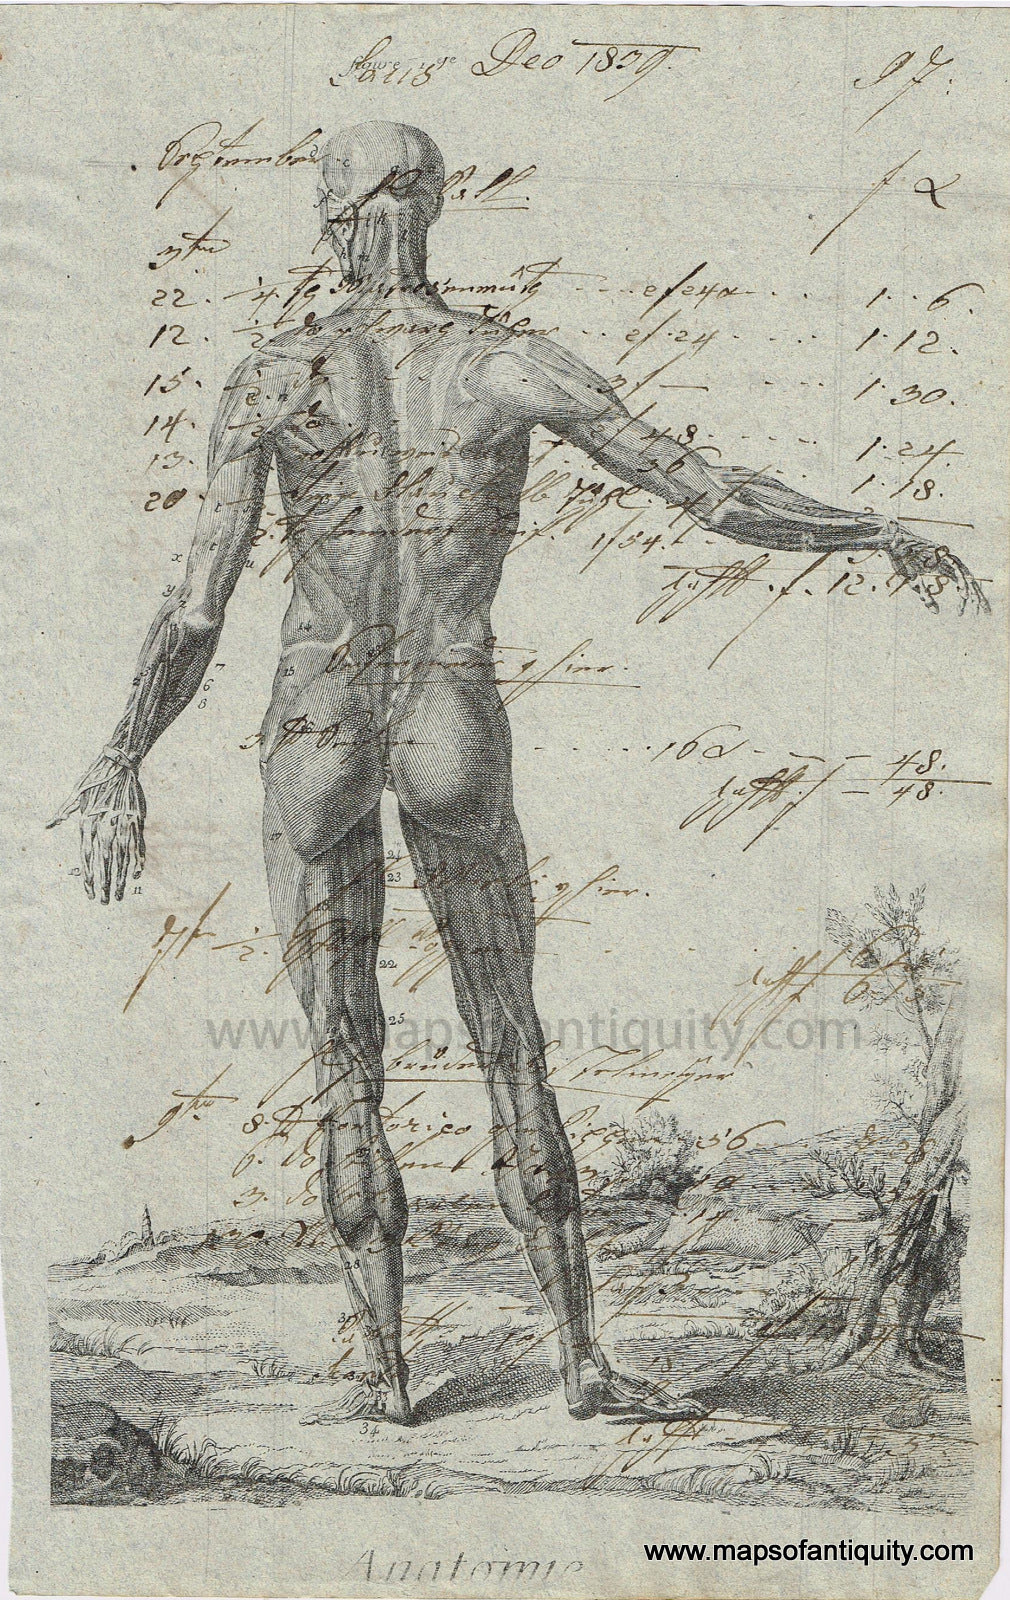 Maps-of-Antiquity-Antique-Ledger-Paper-Print-Digitally-Engraved-Specialty-Reproduction-Illustration-Anatomical-Anatomy-Human-muscular-System-musculature-muscles-body